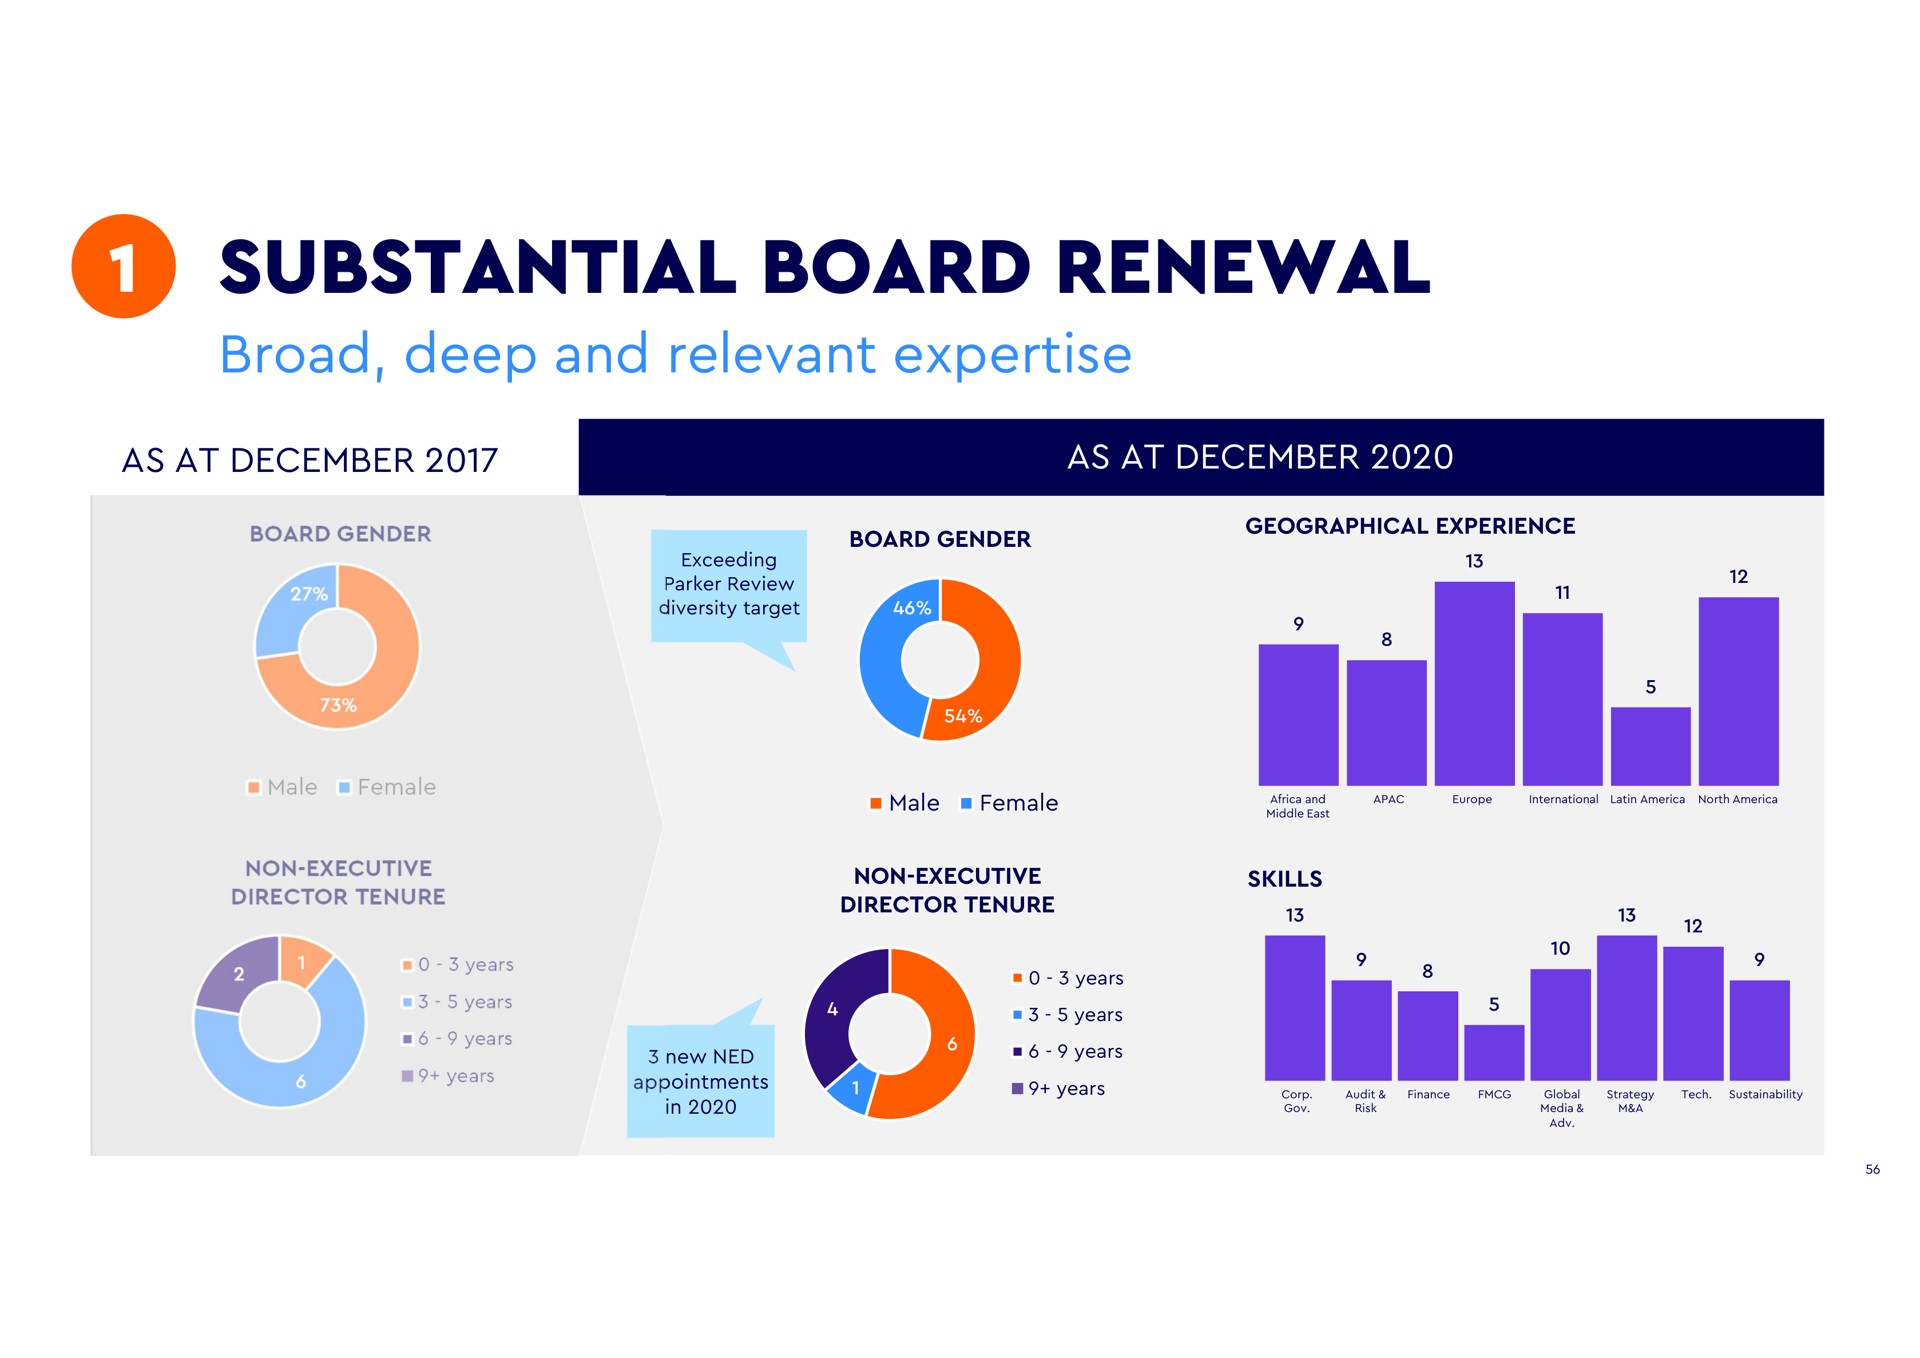 substantial board renewal broad deep and relevant as at as at gender exceeding parker review diversity target gender geographical experience a a non executive director tenure years years a years years male female non executive director tenure new appointments in years years years years and middle east skills corp international north audit risk finance global media strategy a tech | WPP